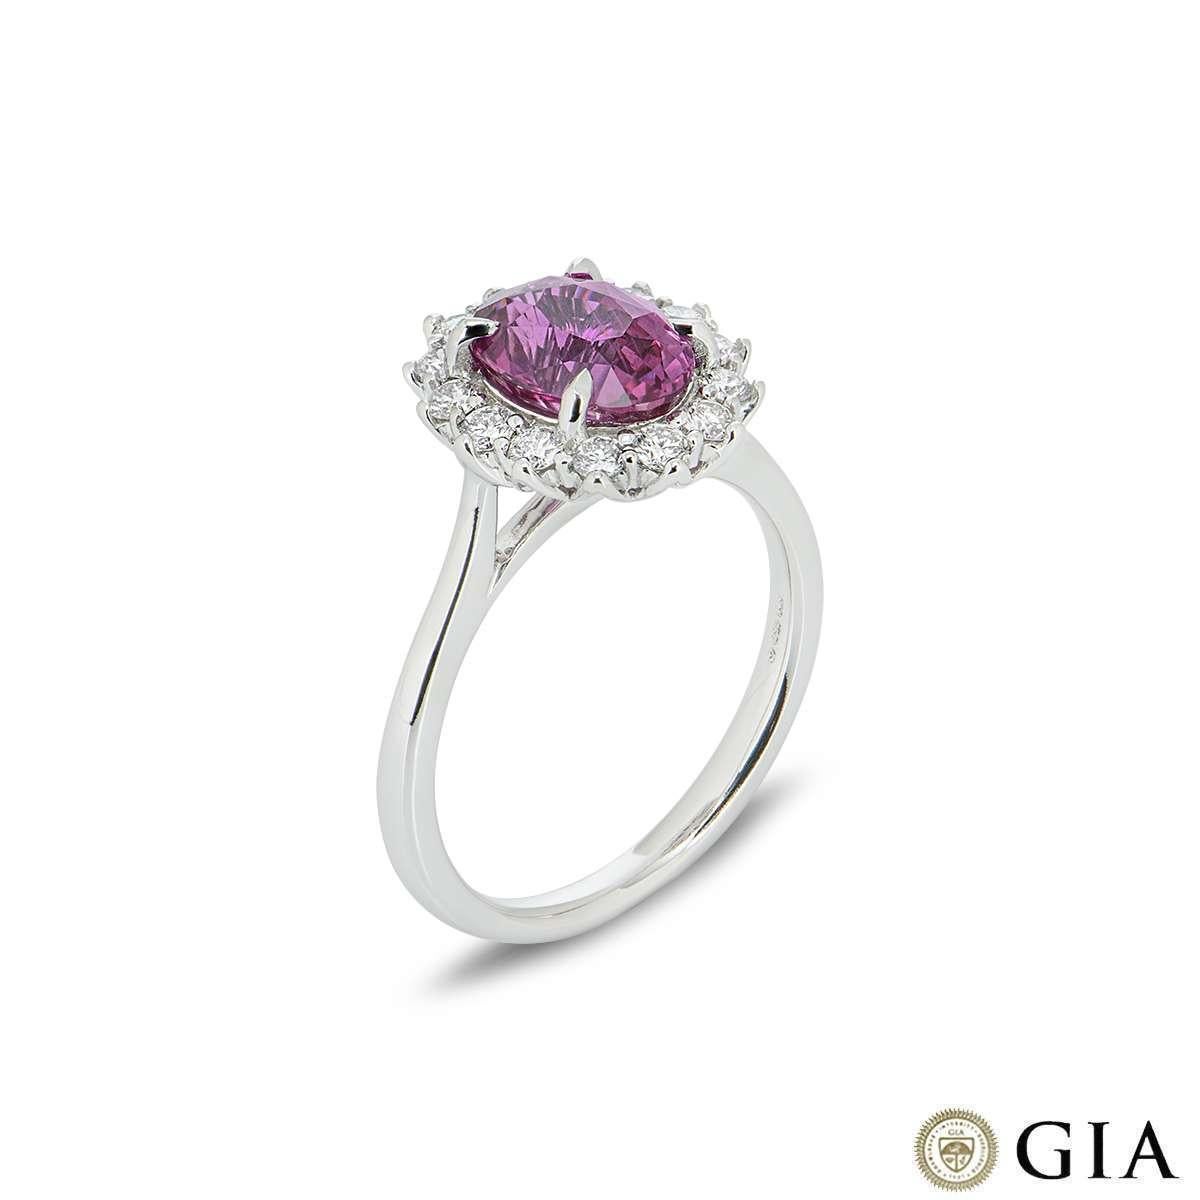 A stunning pink sapphire and diamond ring in 18k white gold. The oval cut pink sapphire weighs 2.58ct and displays a bright even pink colour, with no indications of heating. Surrounding the sapphire are 14 round brilliant cut diamonds totalling